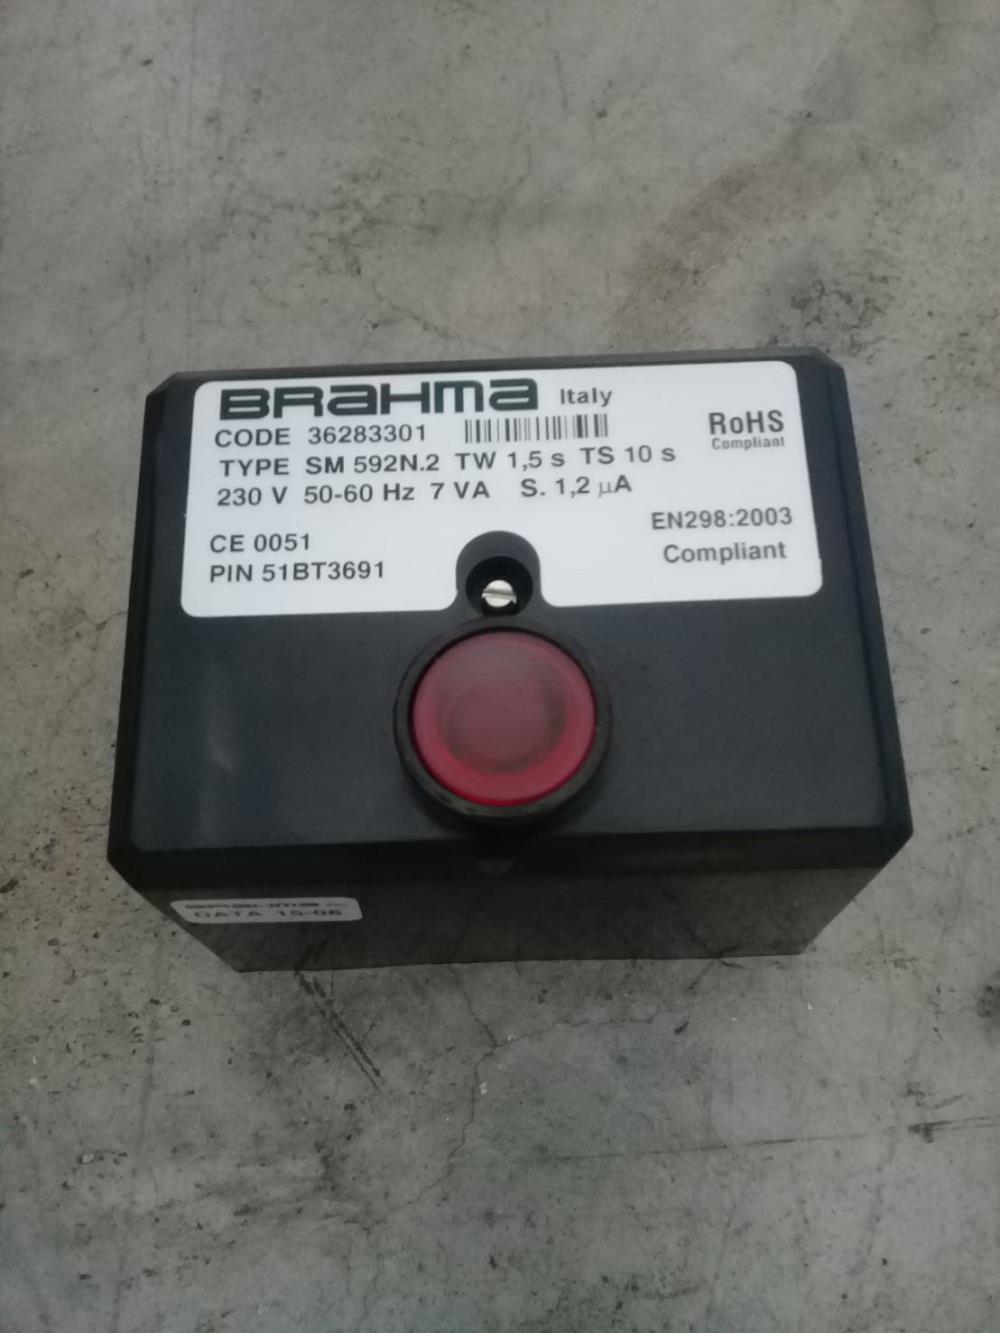 "BRAHMA" Burner Controller TYPE : SM 592 N.2 TW,"BRAHMA" Burner Controller  SM 592 N.2 TW  230V  CODE : 36283301,BRAHMA,Instruments and Controls/Controllers